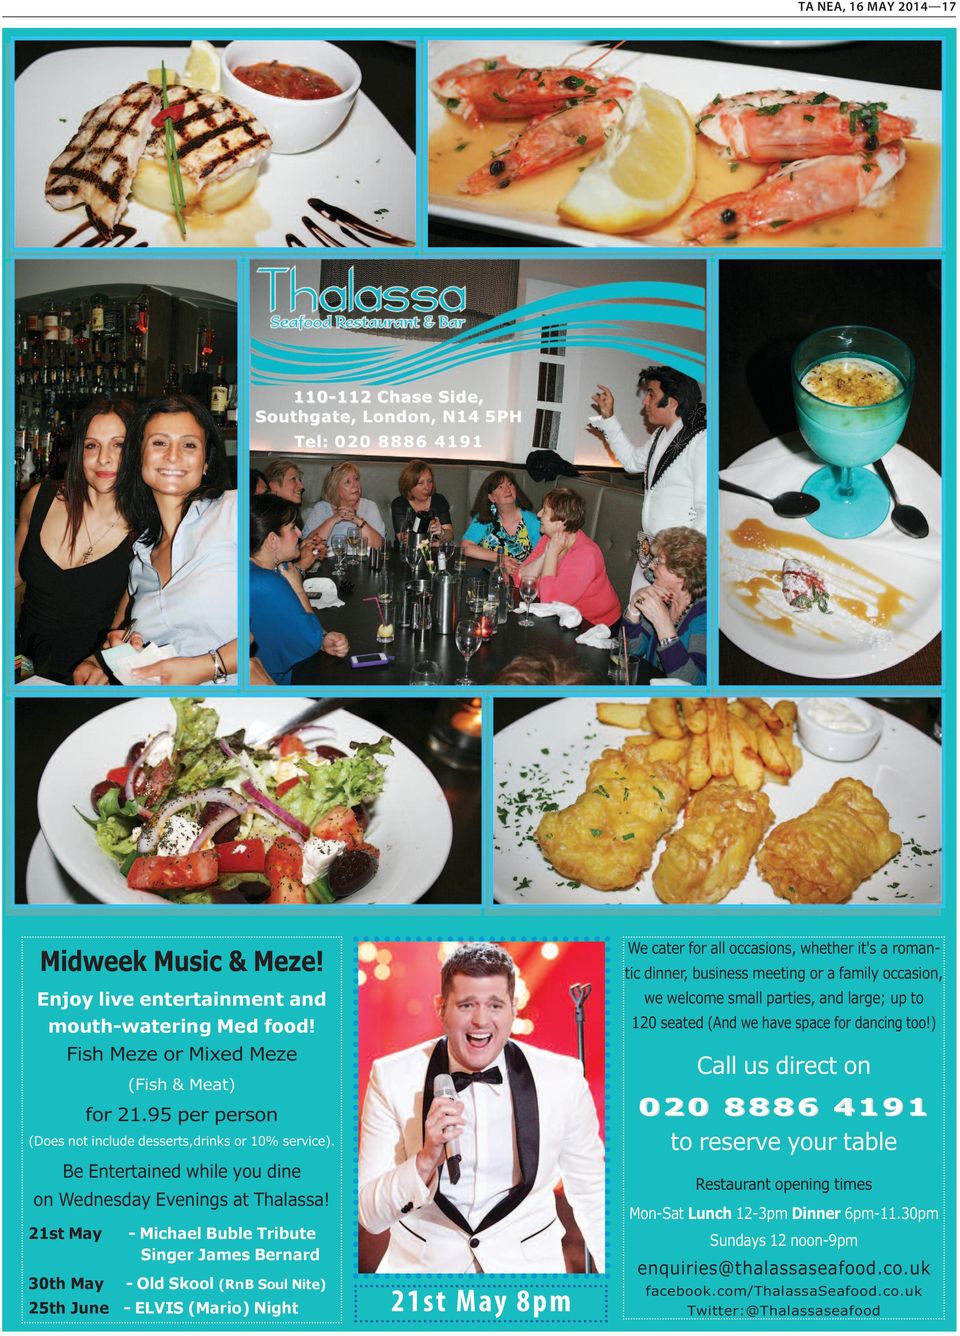 21st May 30th May 25th June - Michael Buble Tribute Singer James Bernard - Old Skool (RnB Soul Nite) - ELVIS (Mario) Night 2 1 s t M ay 8pm We cater for all occasions, whether it's a romantic dinner,